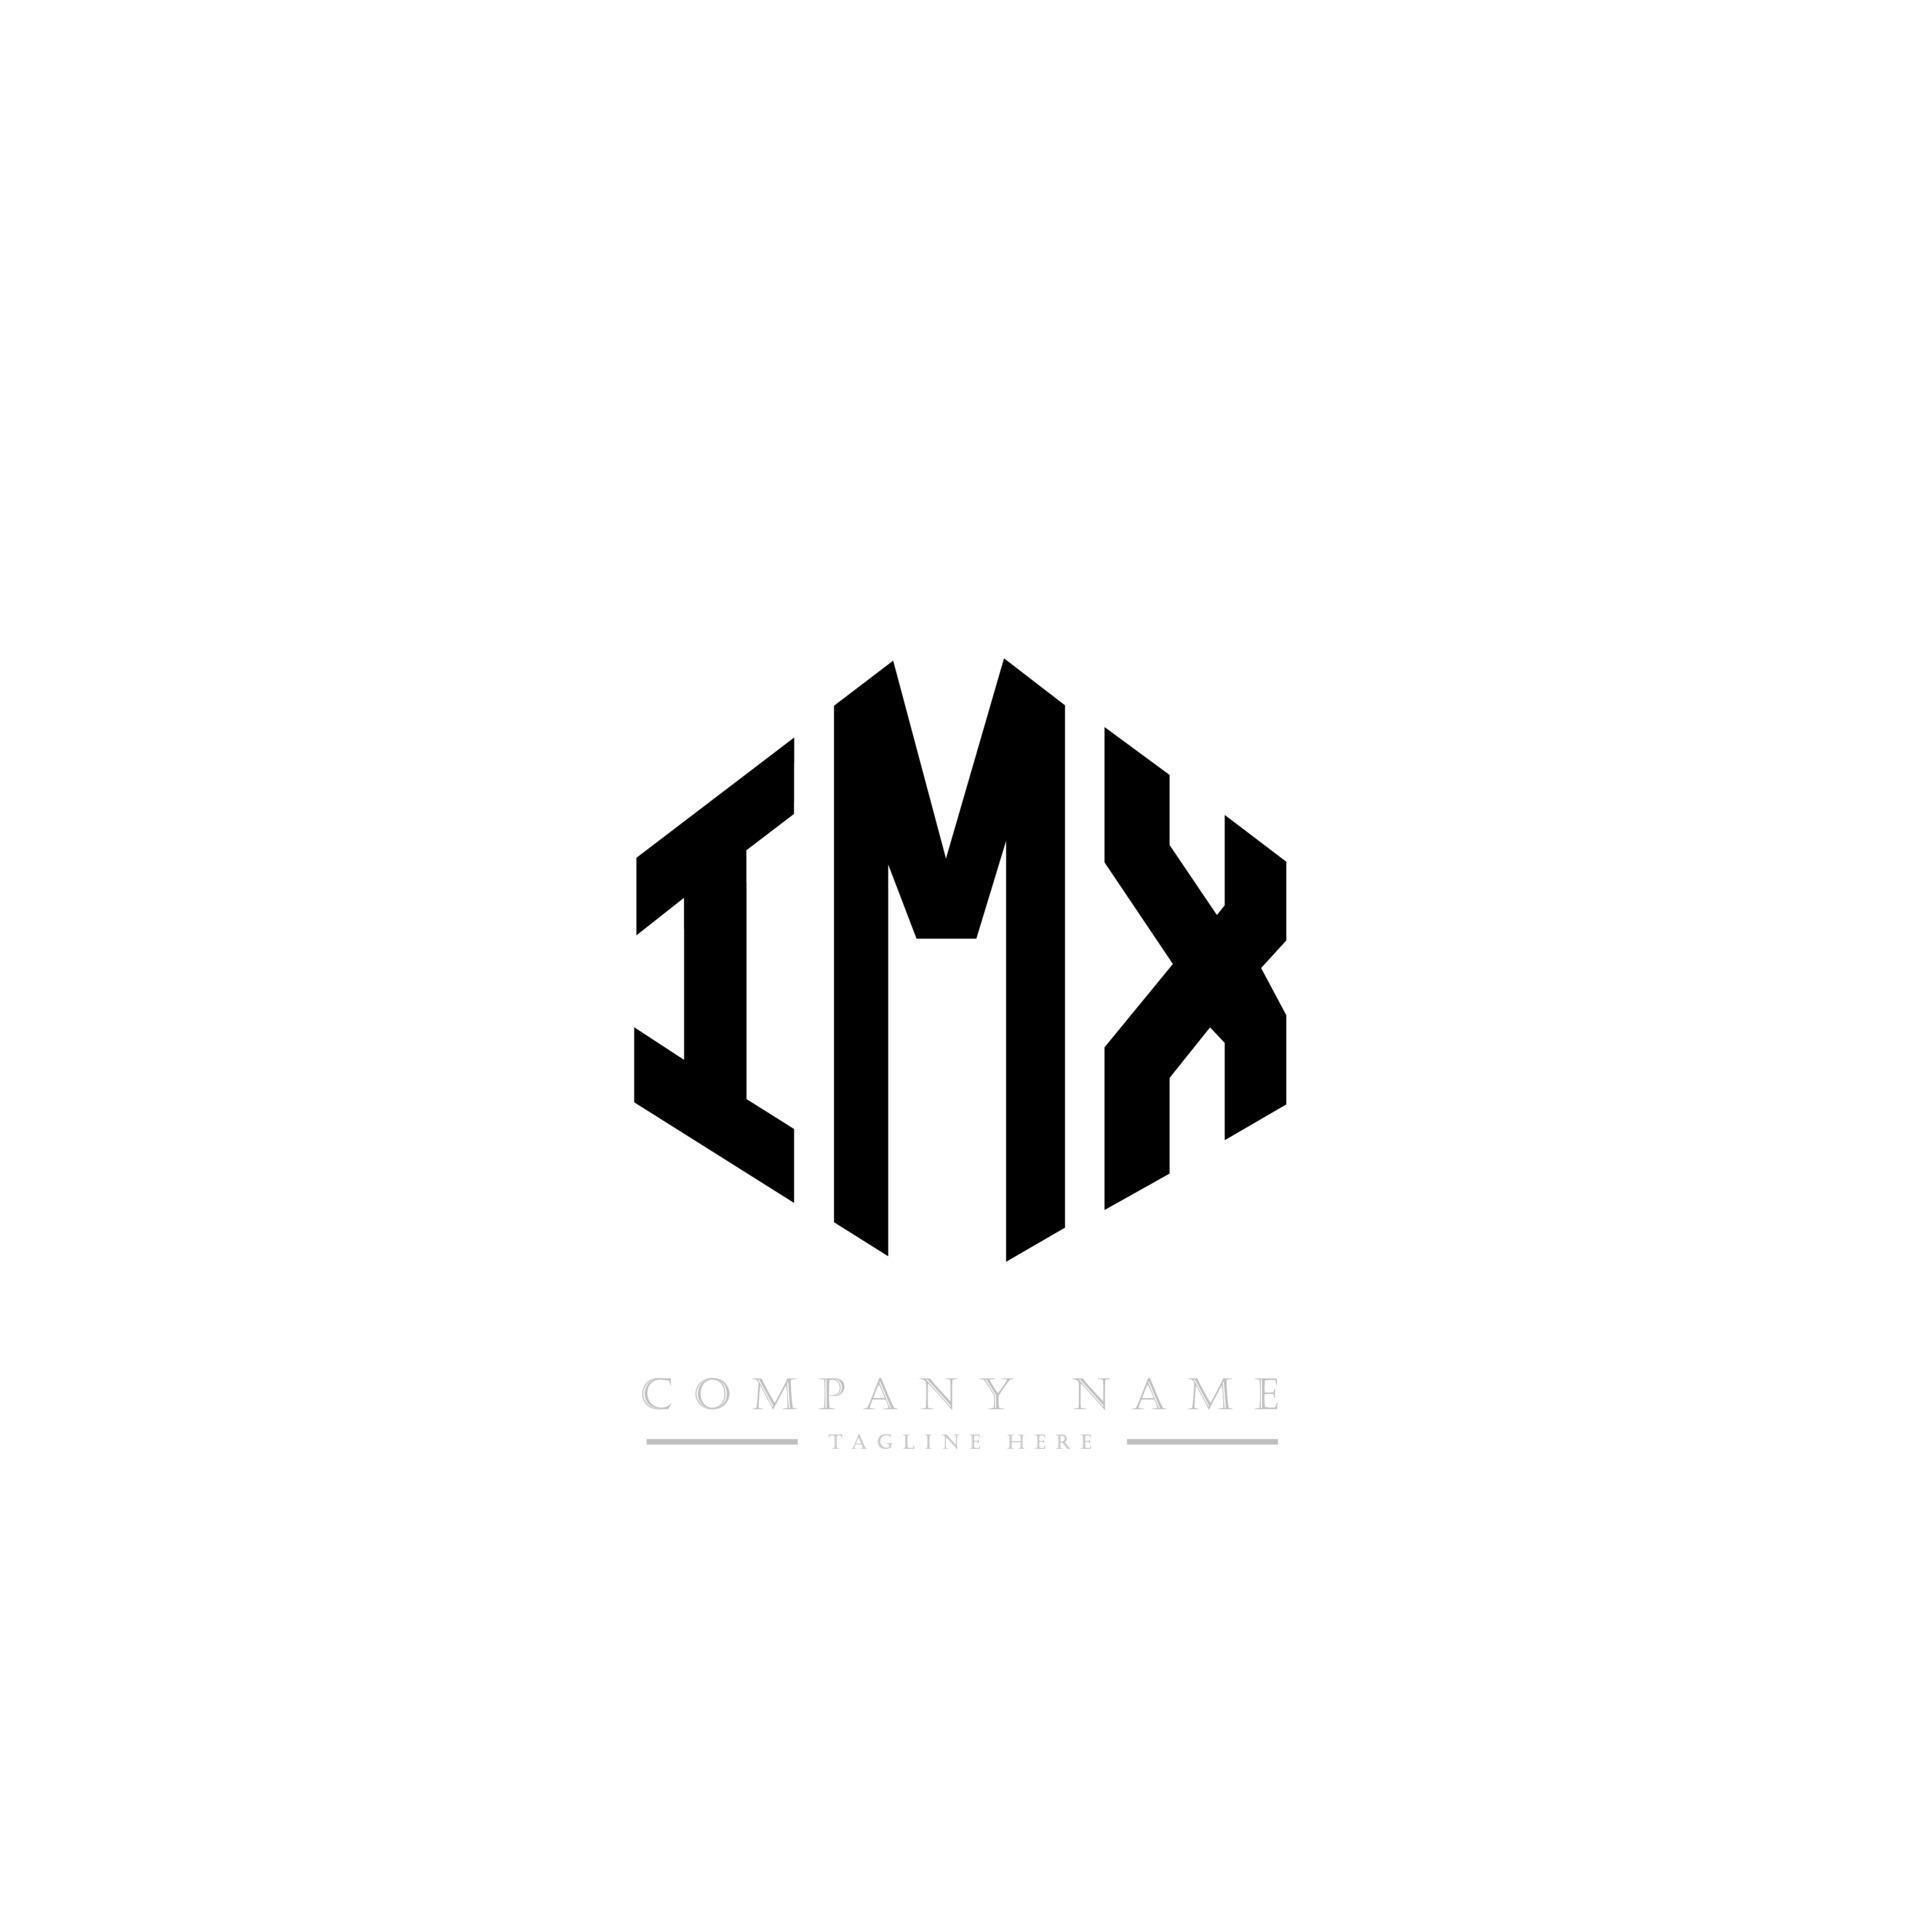 Imx Letter Logo Design With Polygon Shape Imx Polygon And Cube Shape